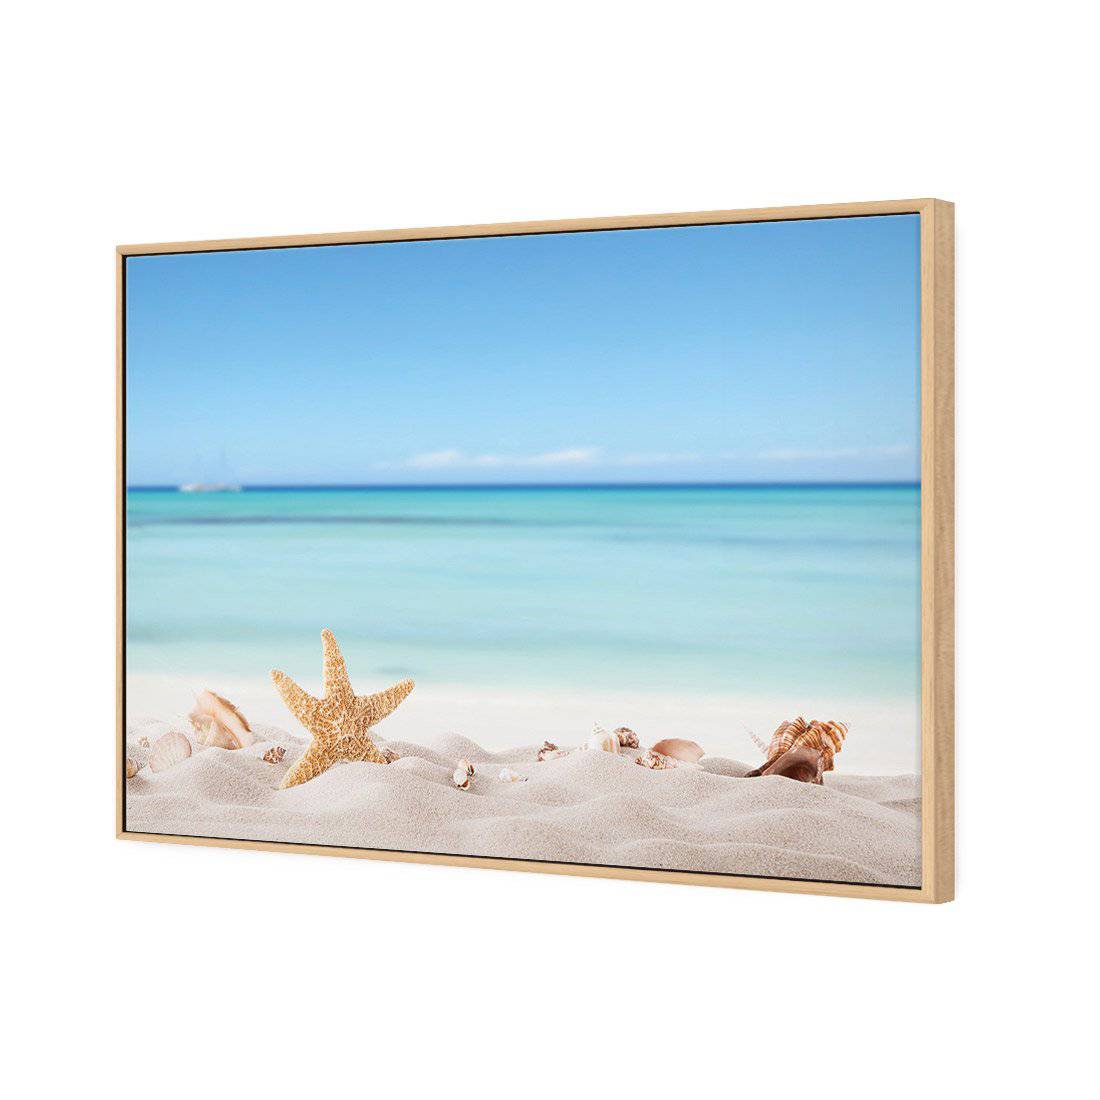 Starfish and Friends Canvas Art-Canvas-Wall Art Designs-45x30cm-Canvas - Oak Frame-Wall Art Designs